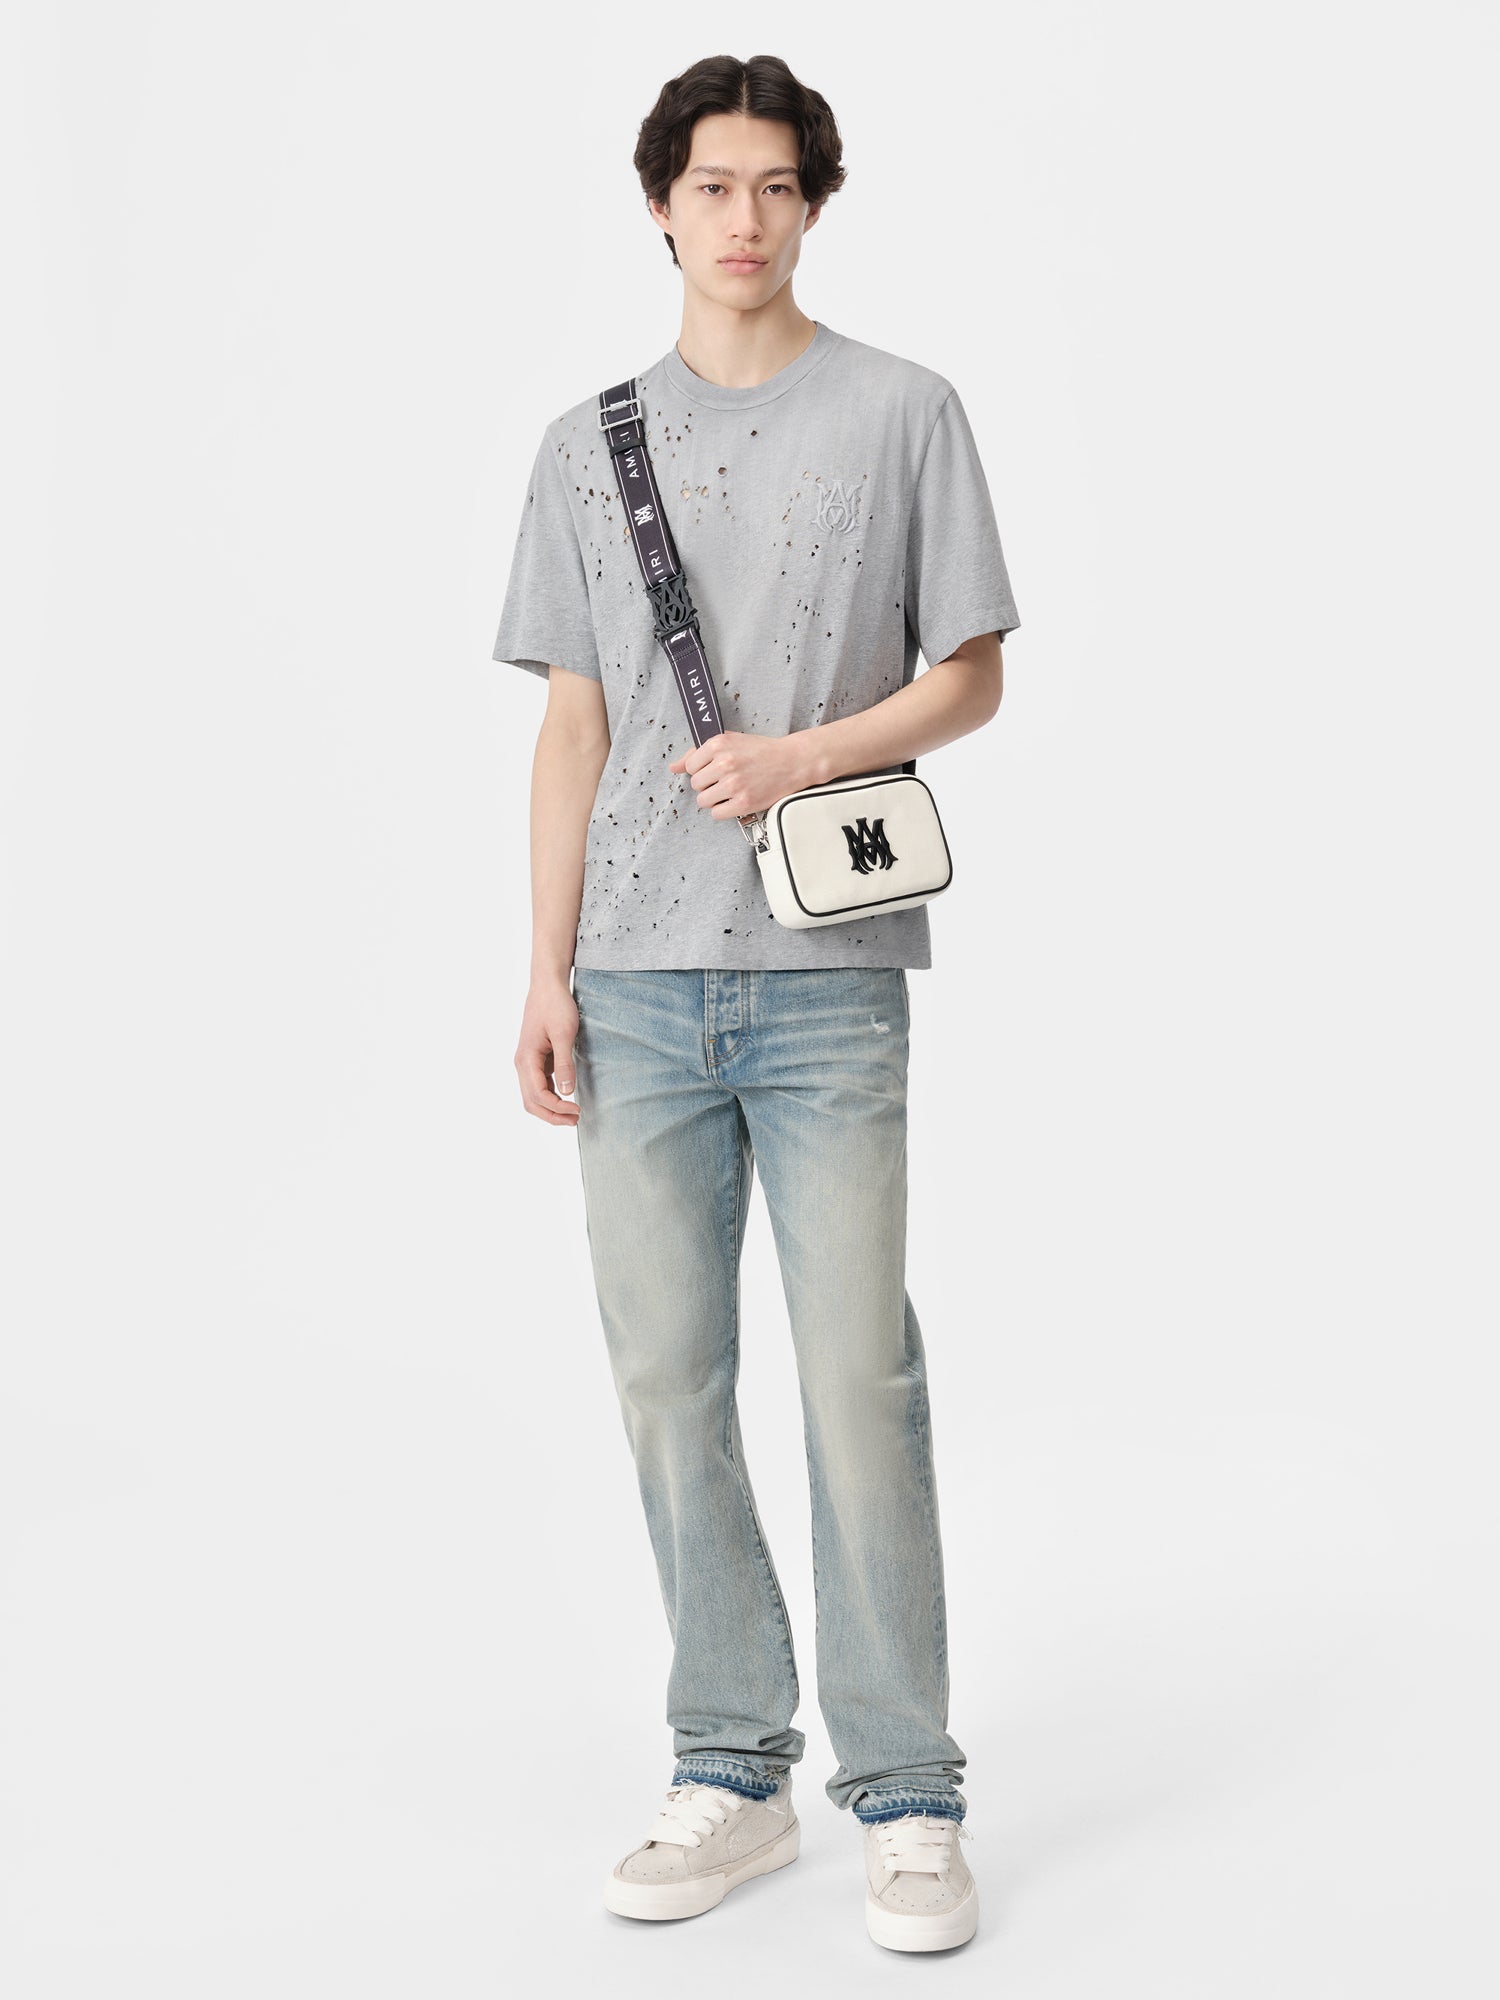 Product MA SHOTGUN EMBROIDERED TEE - Grey featured image